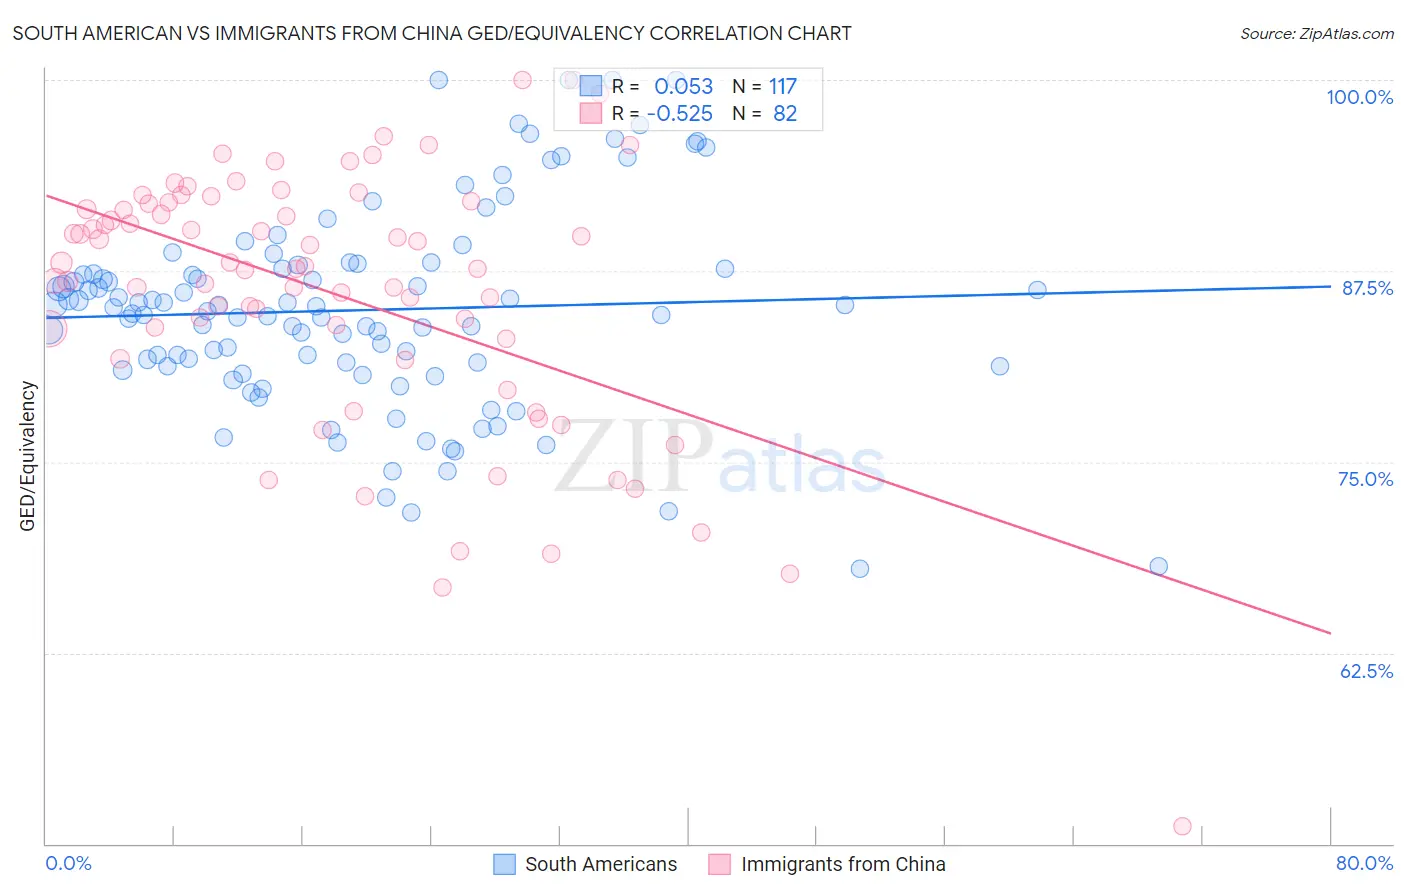 South American vs Immigrants from China GED/Equivalency